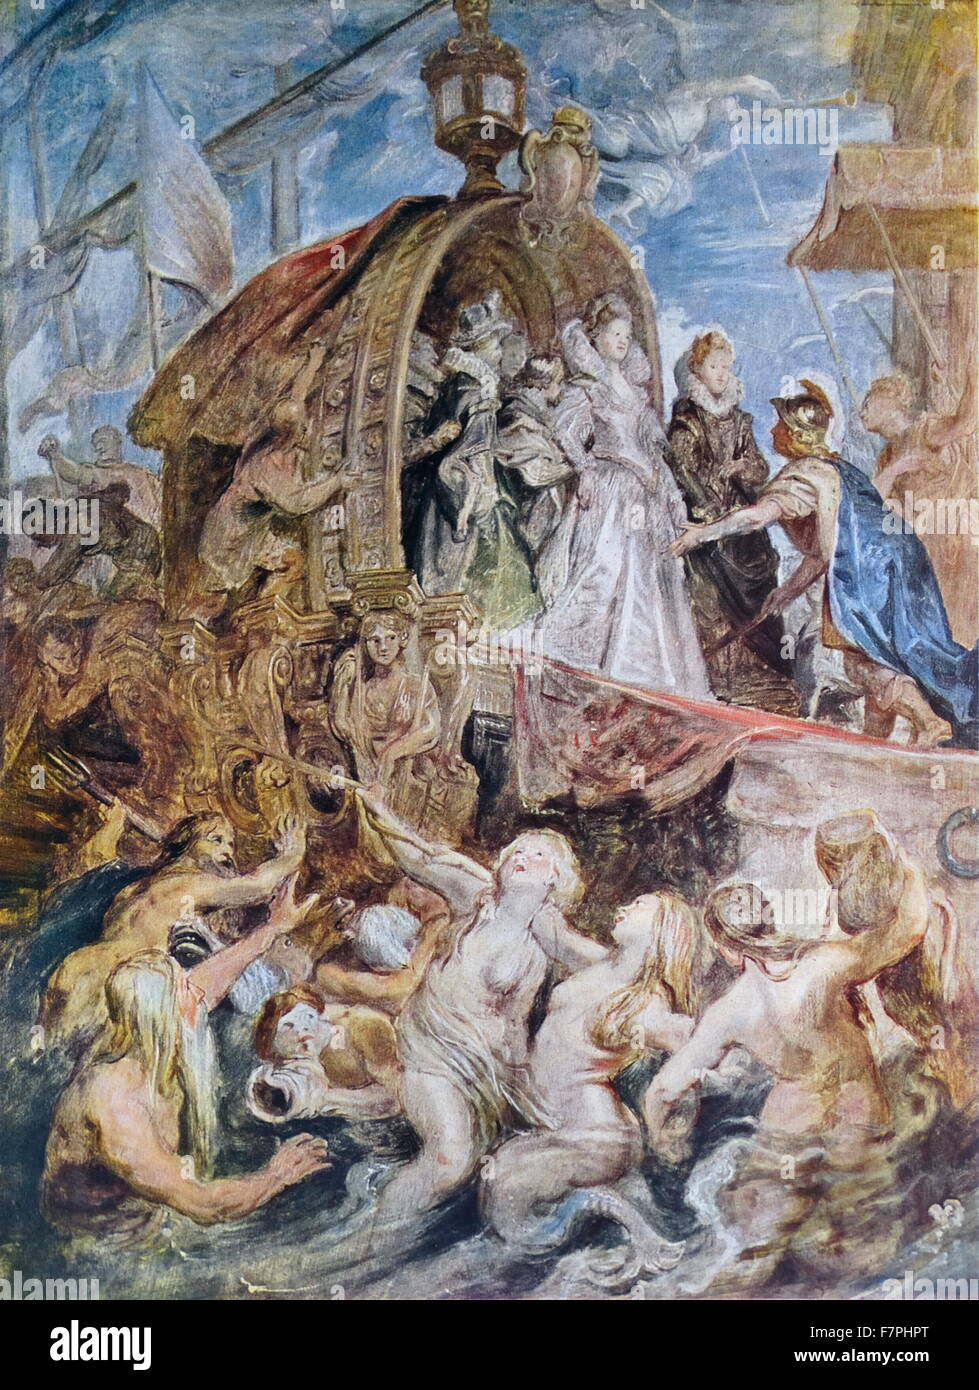 Painting titled 'Marie de Medicis, Queen of France, Landing in Marseilles' by Peter Paul Rubens (1577-1640) Flemish Baroque painter. Dated 17th Century Stock Photo